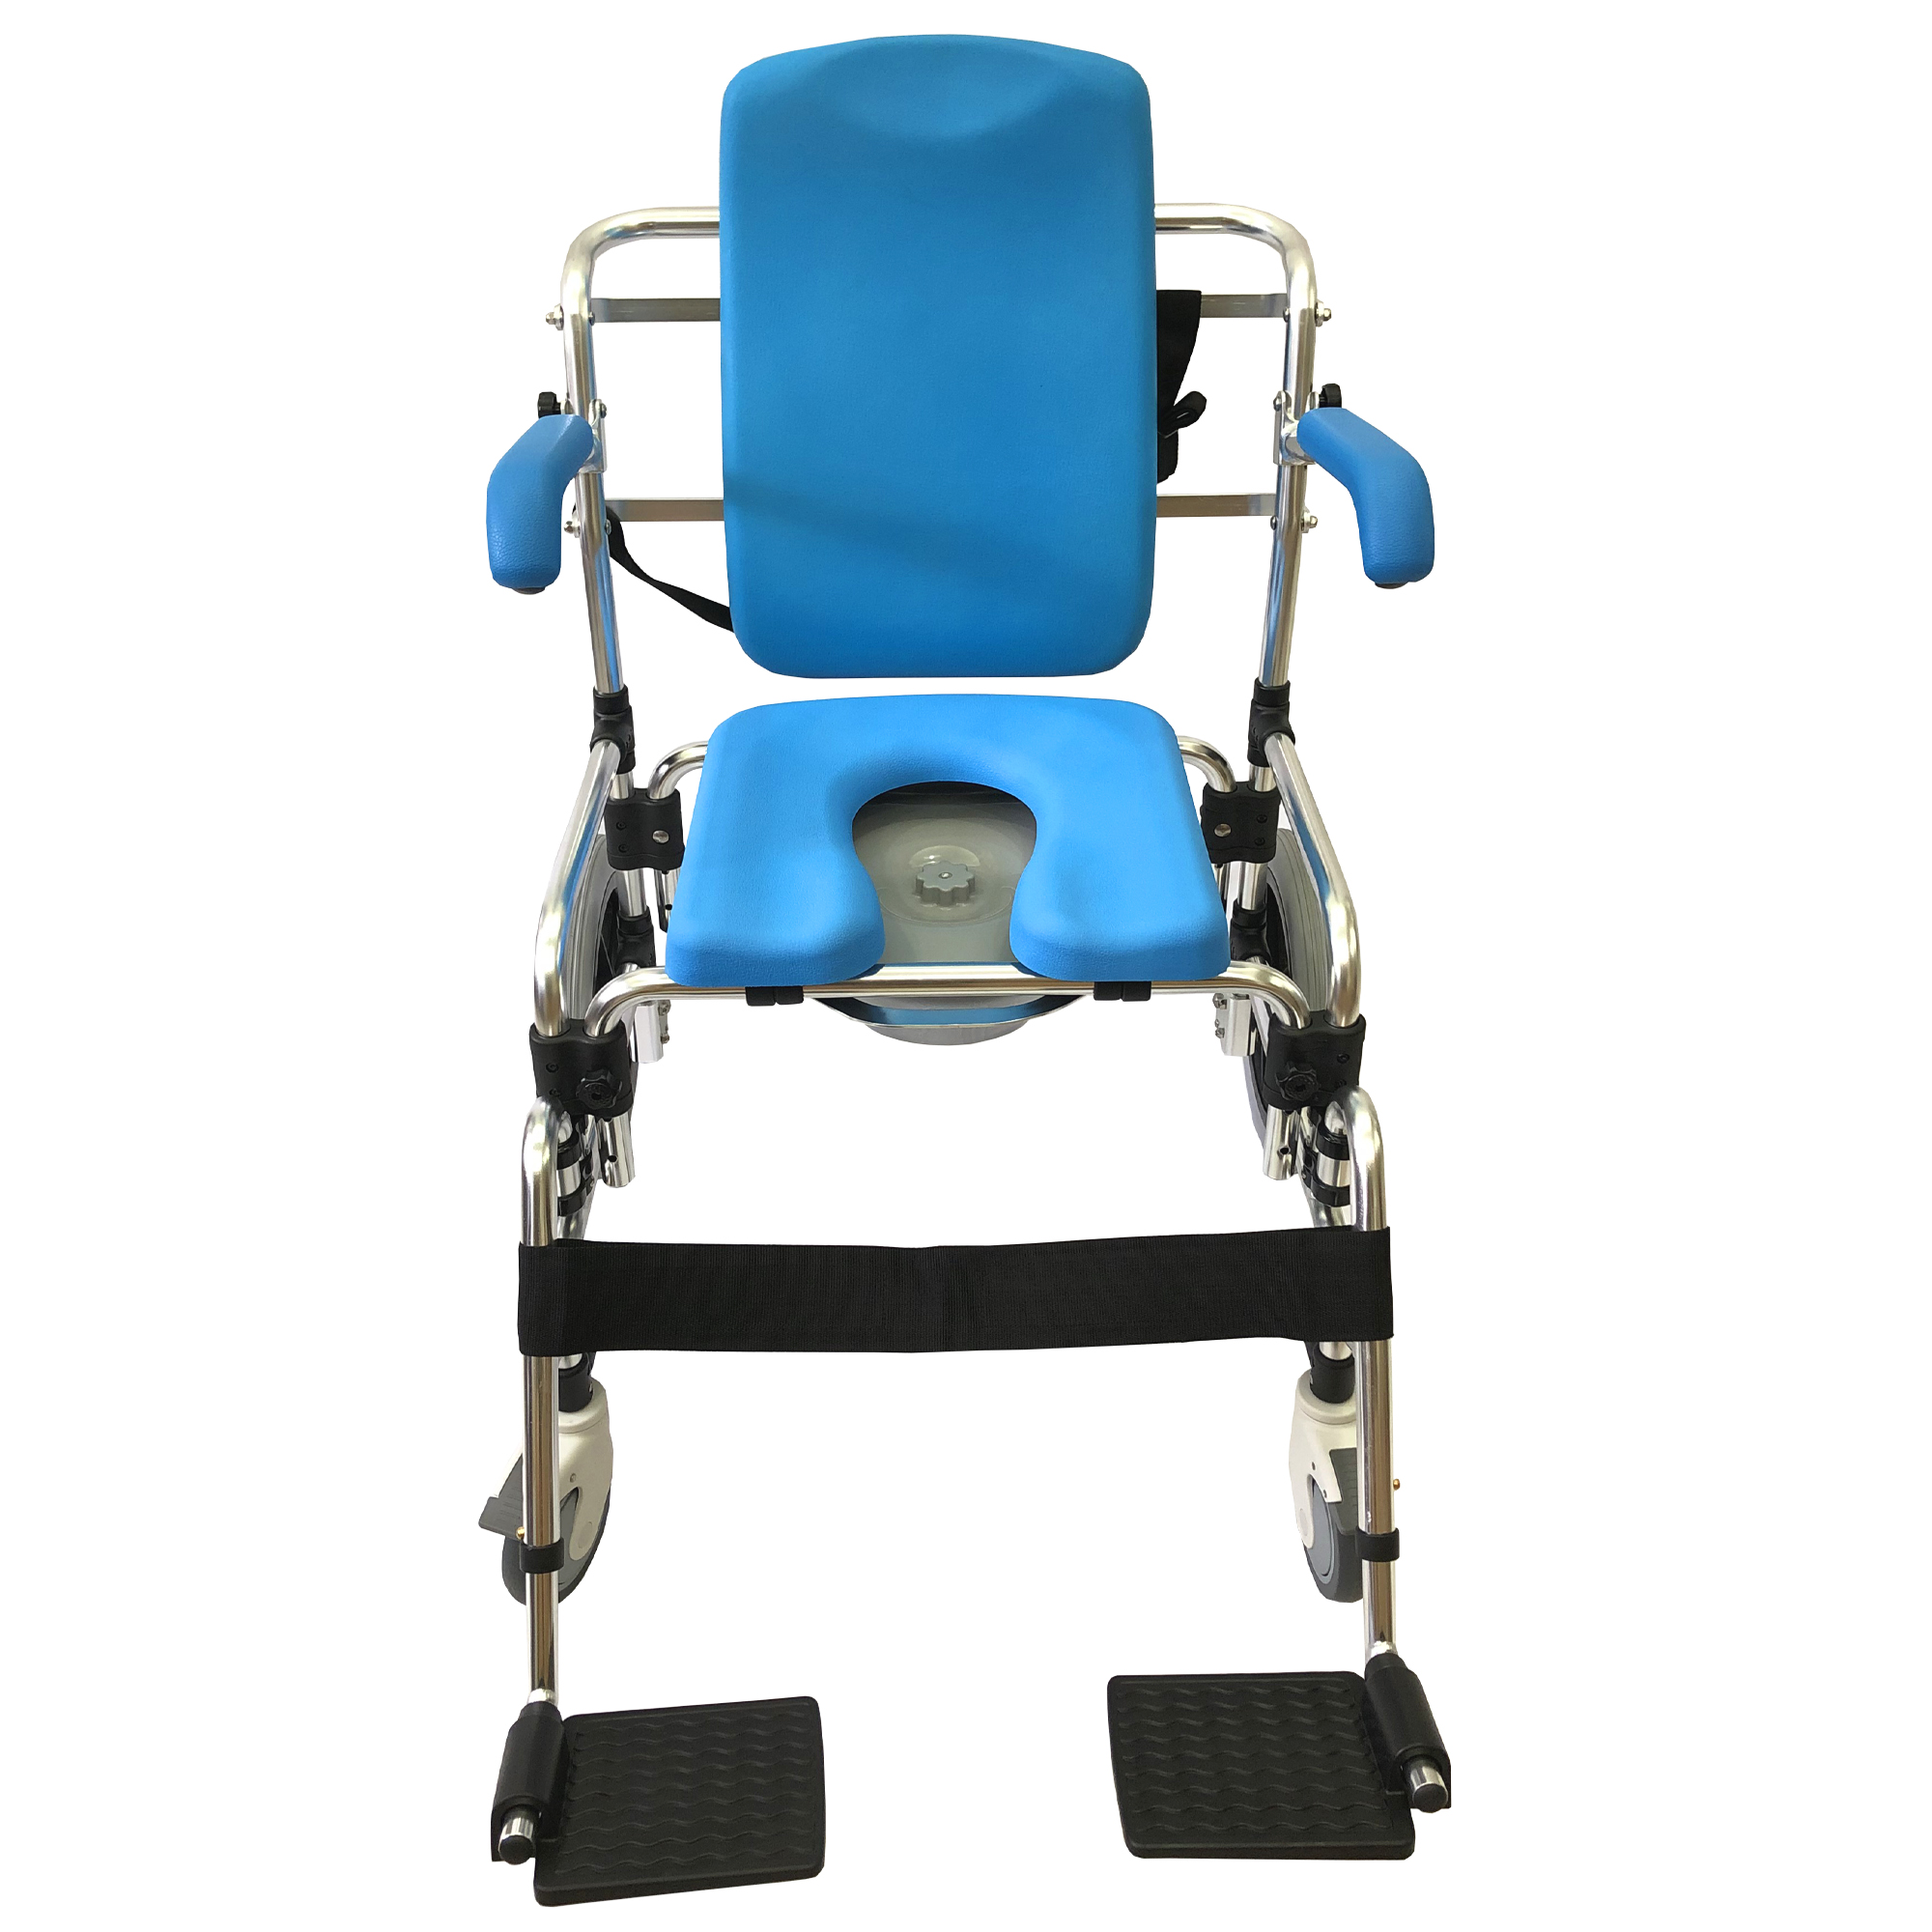 Platinum Health Baltic Professional Transport Shower / Commode / Toilet Padded Chair - image 2 of 5